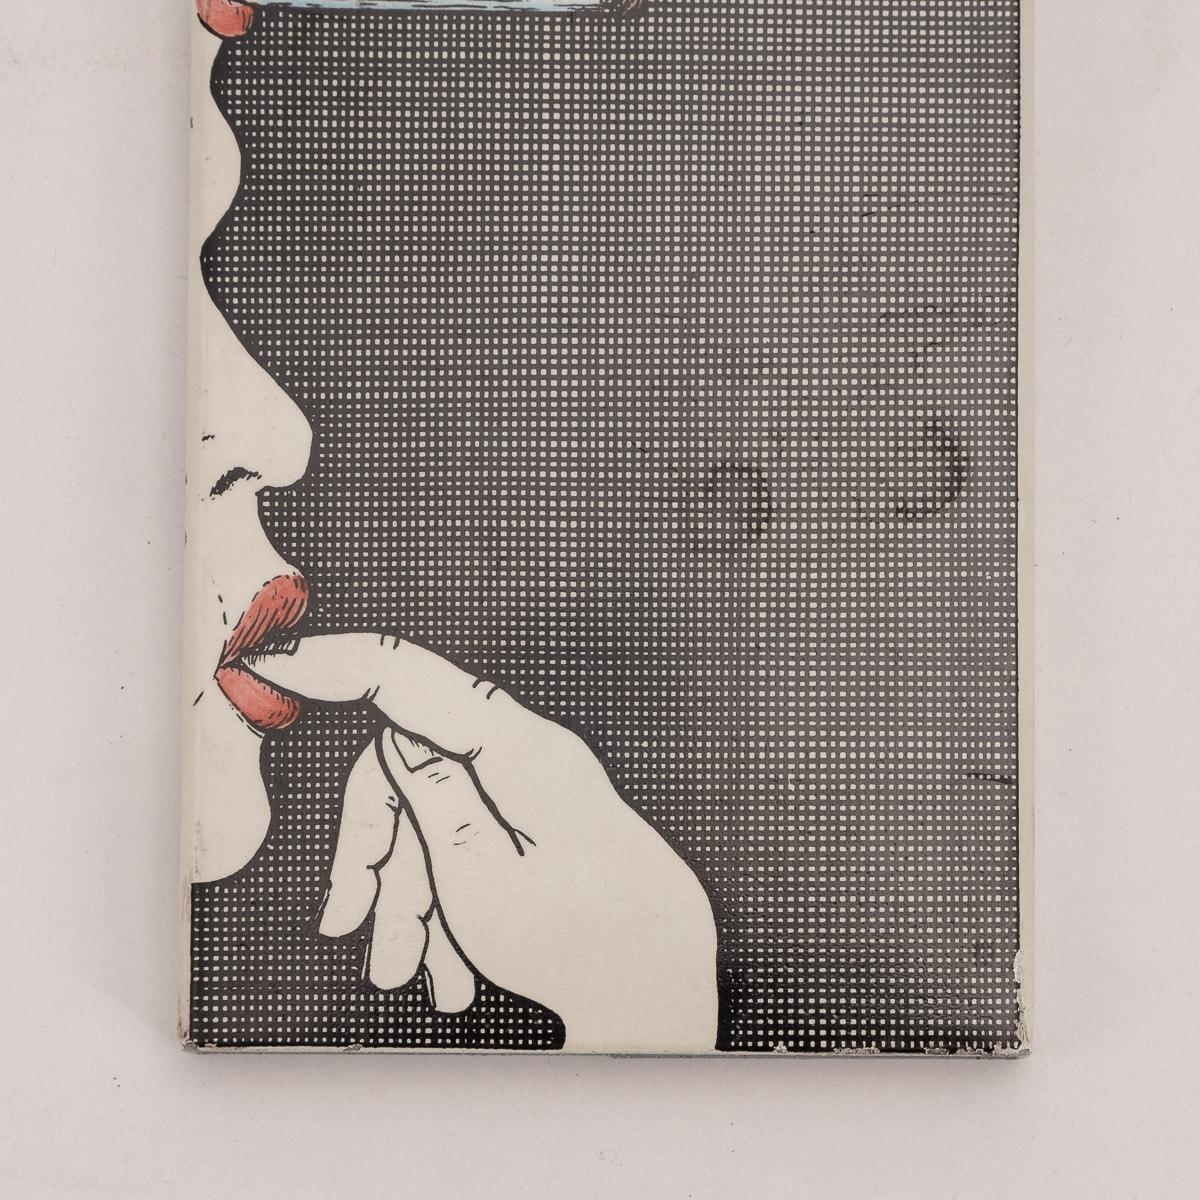 20th Century Large Metal Matchbox By Piero Fornasetti, Italy, c.1960 For Sale 3